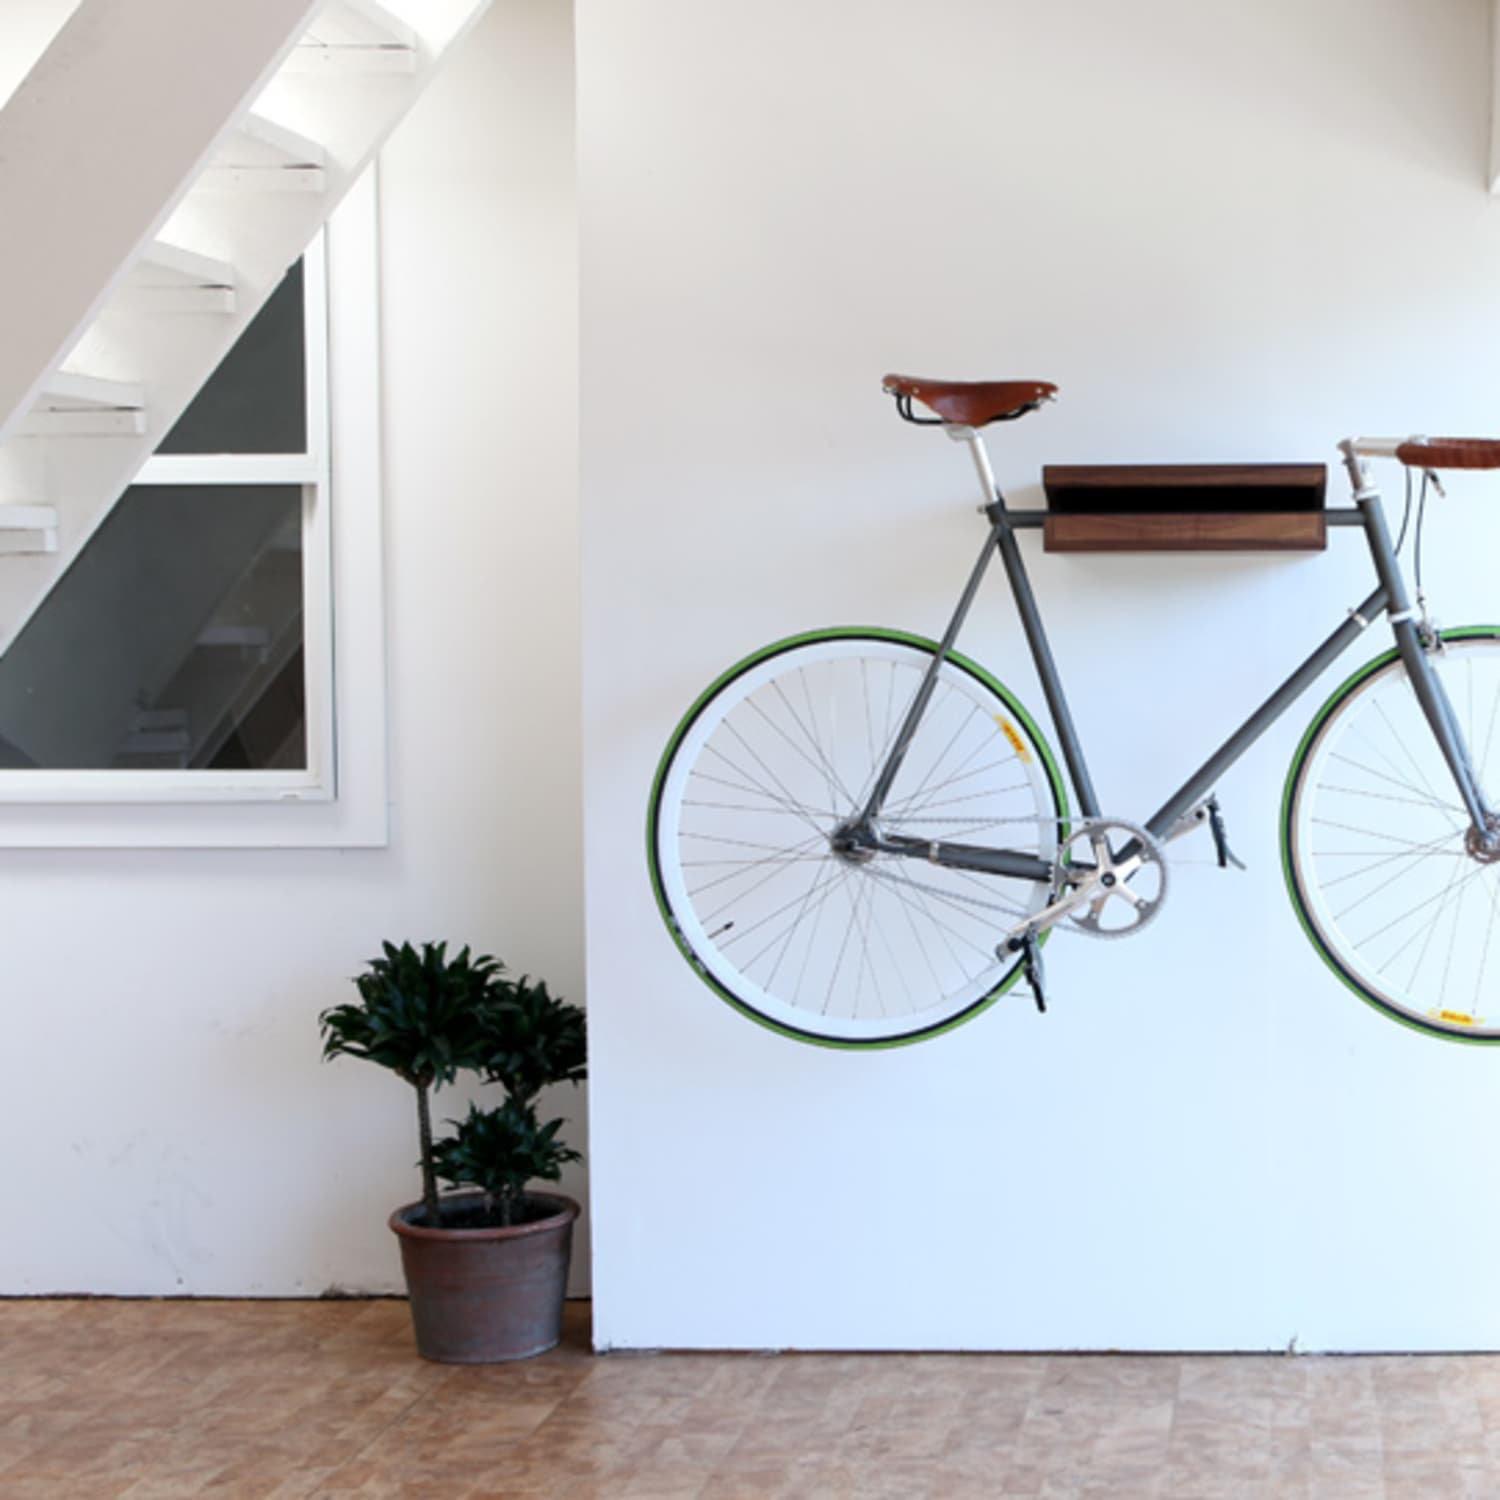 How To Hang A Bike From The Ceiling